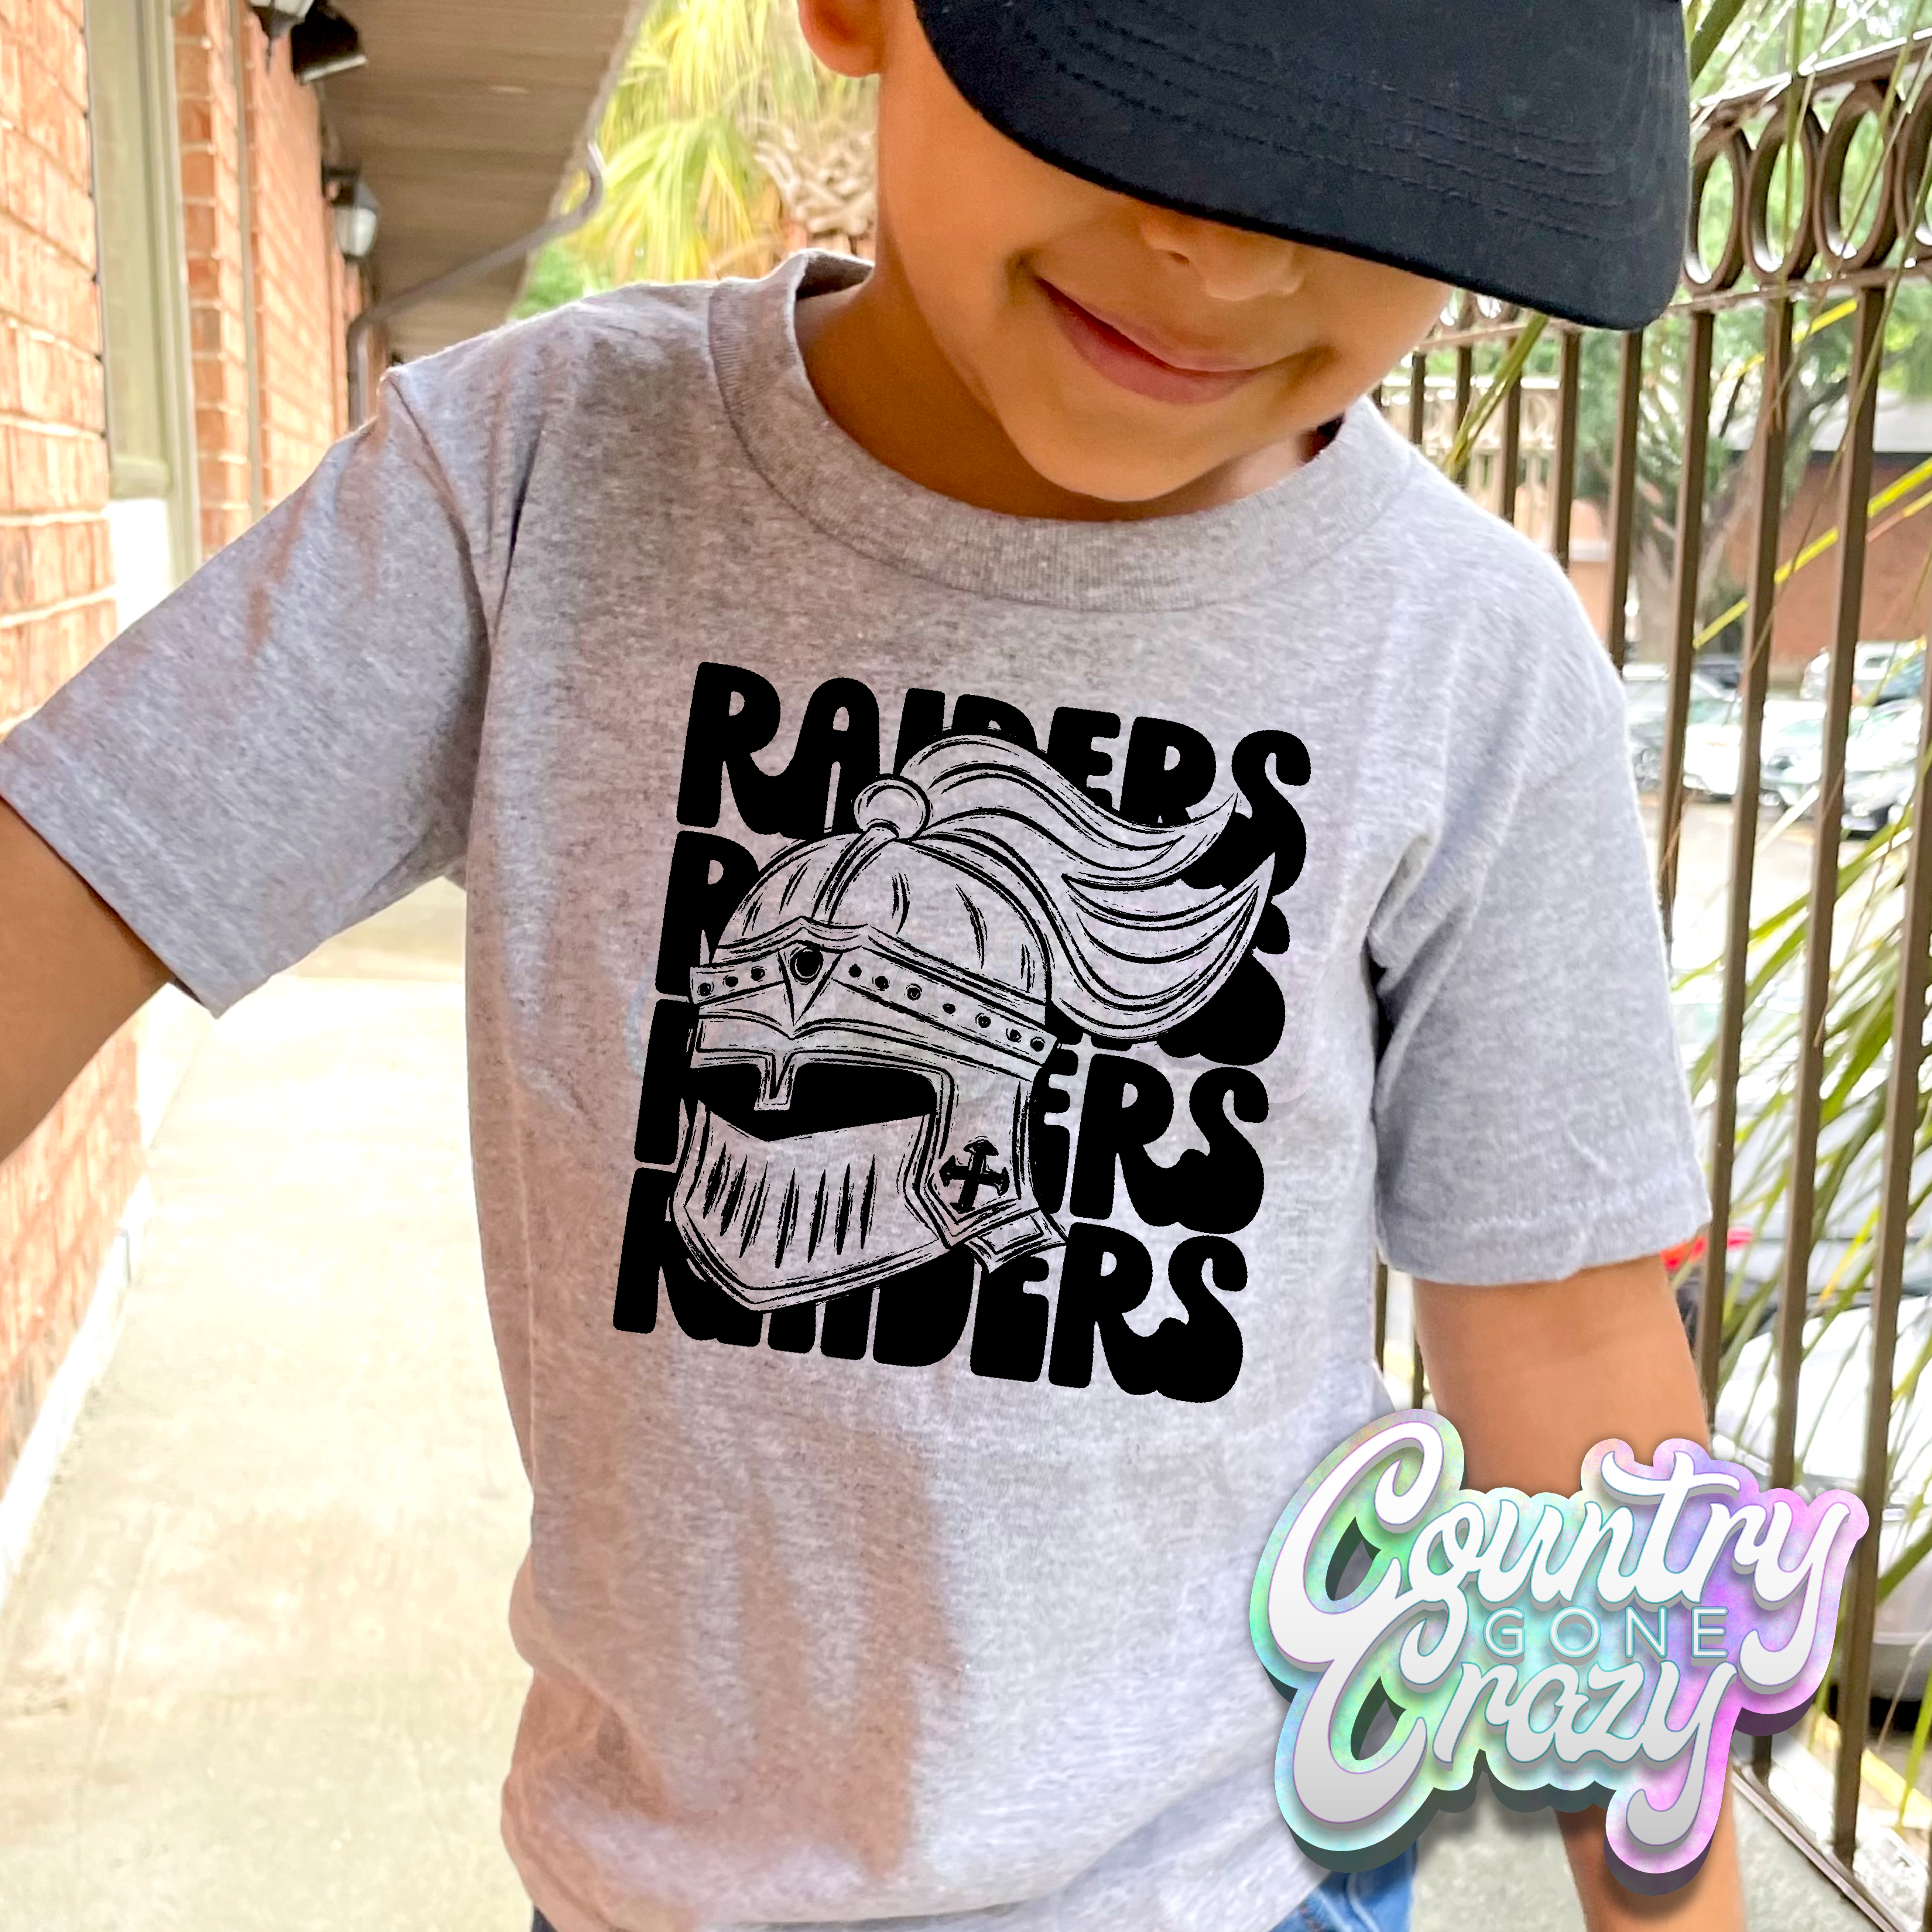 Get your Raiders gear on!